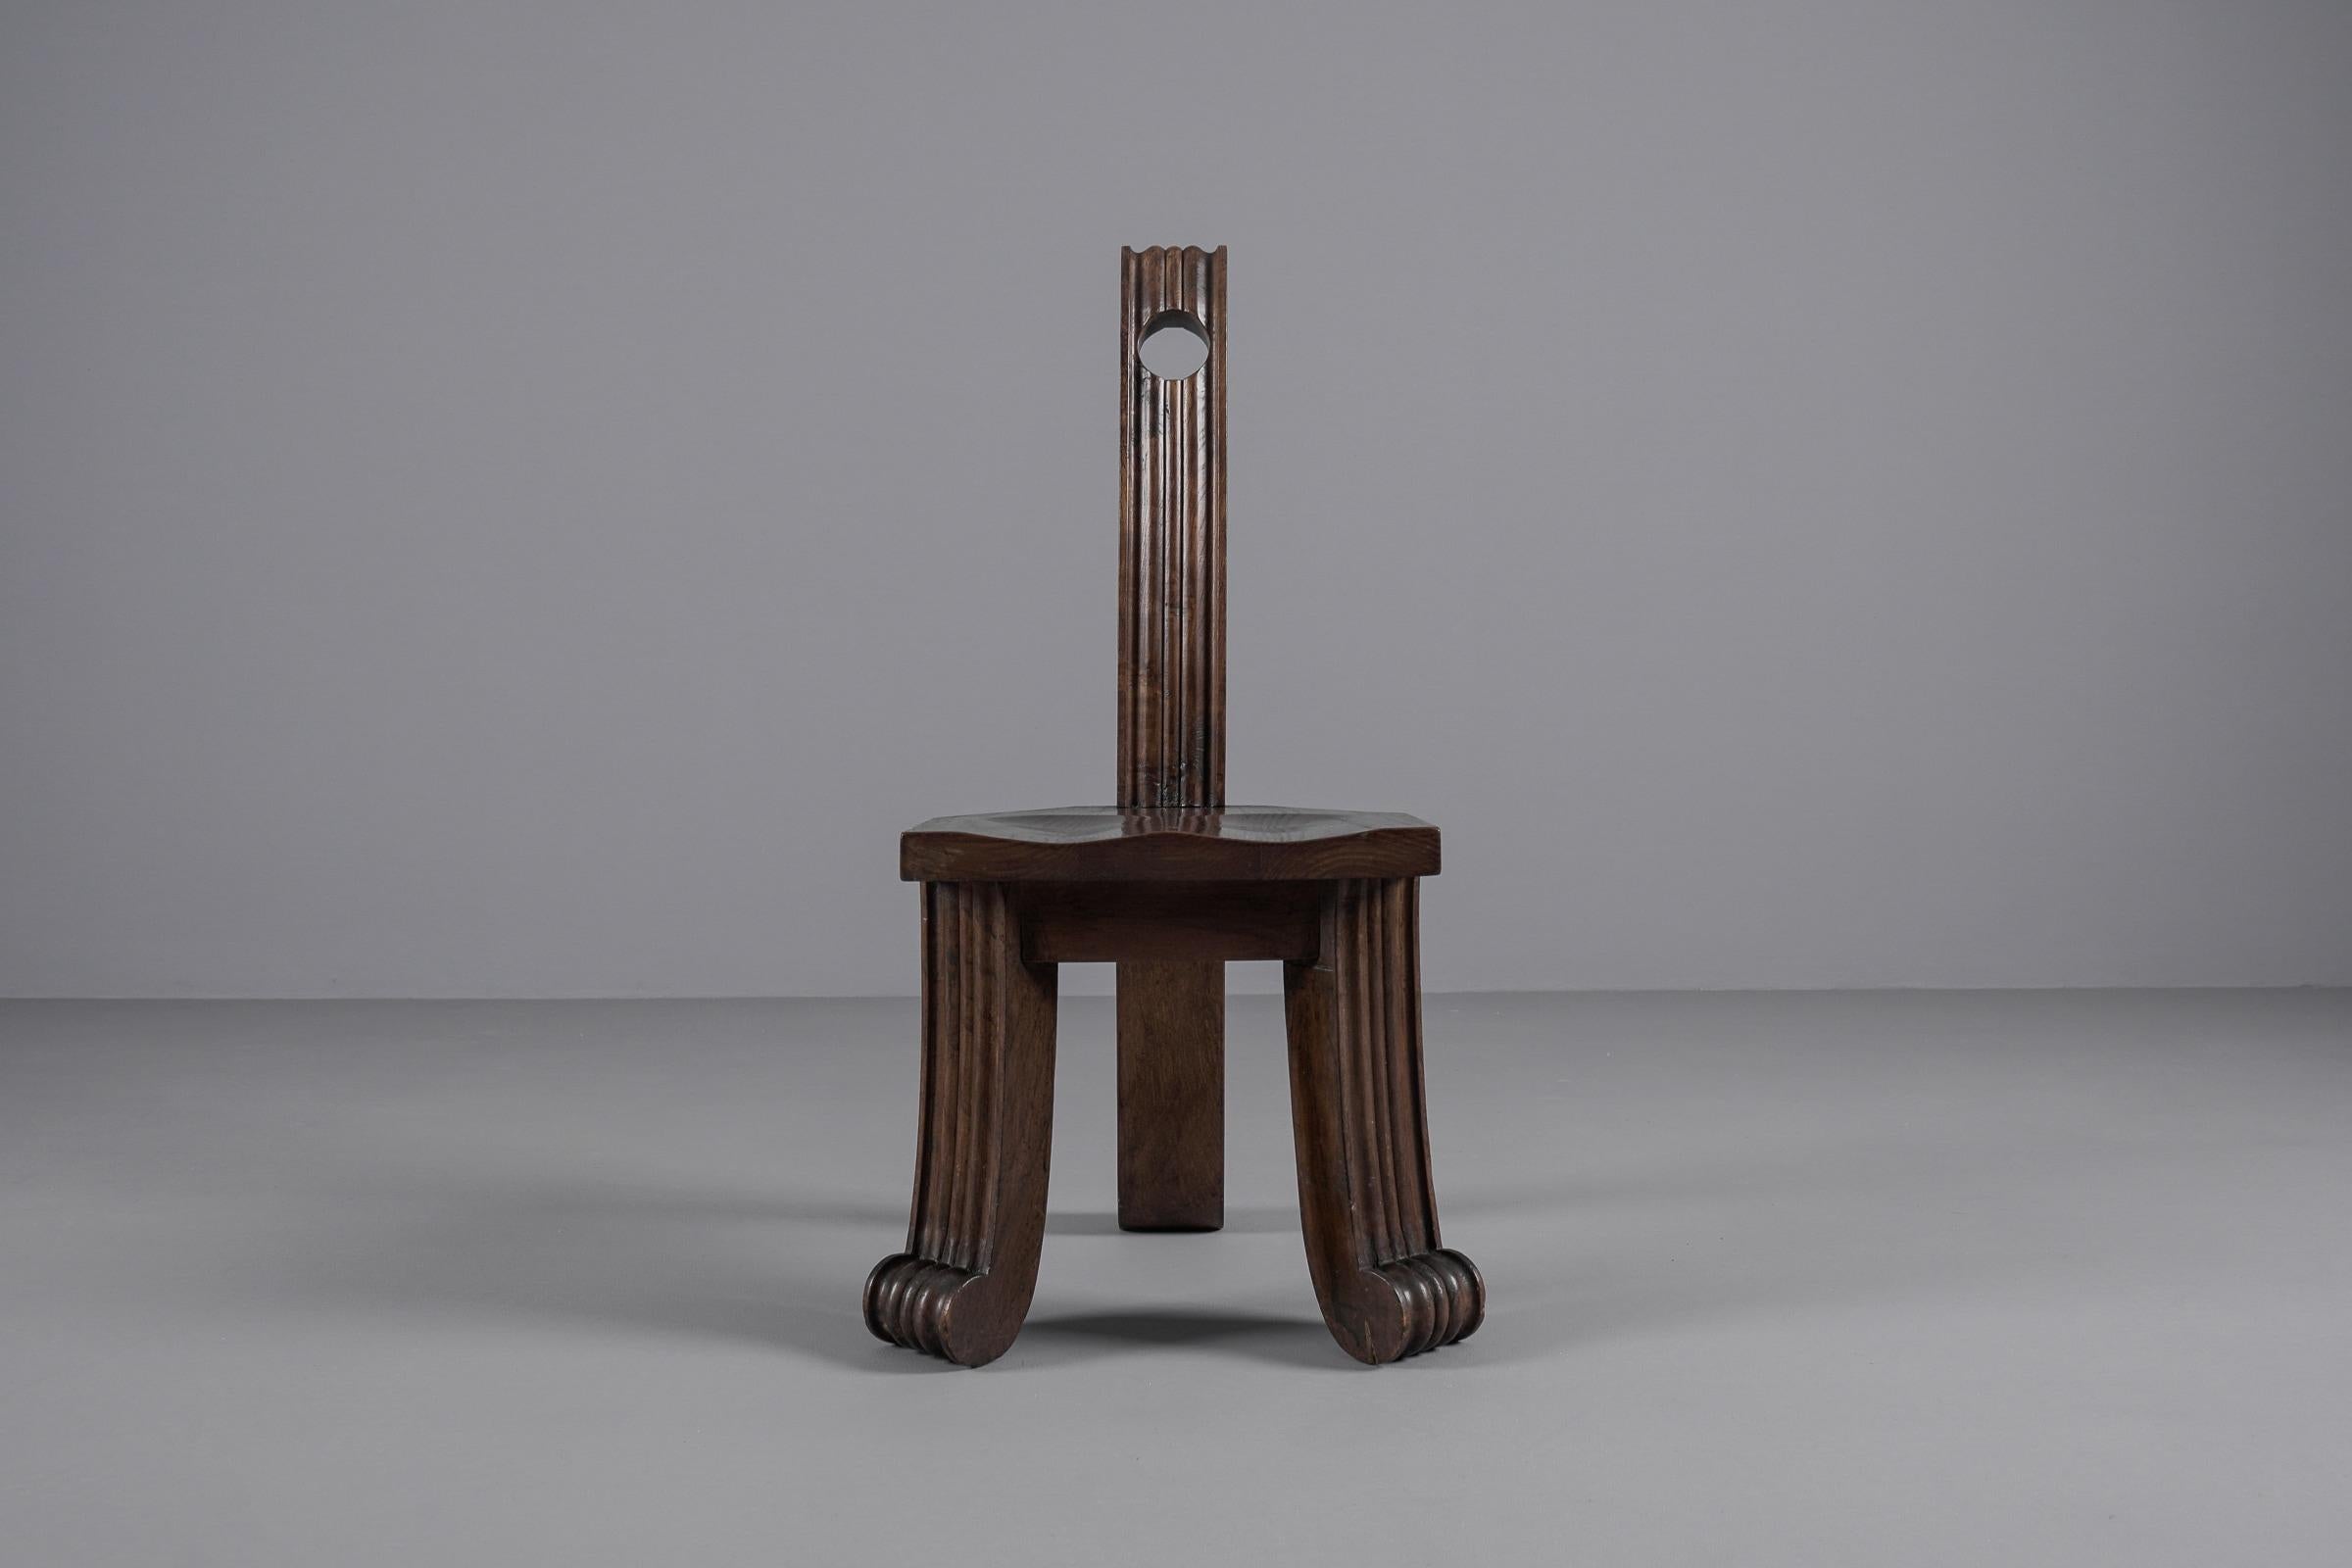 Solid sculptural wooden chair from the 1940s / 1950s. 

Seat height 35cm, total height 81cm, seat width 35cm, total width 42cm, seat depth 32cm, total depth 46cm.